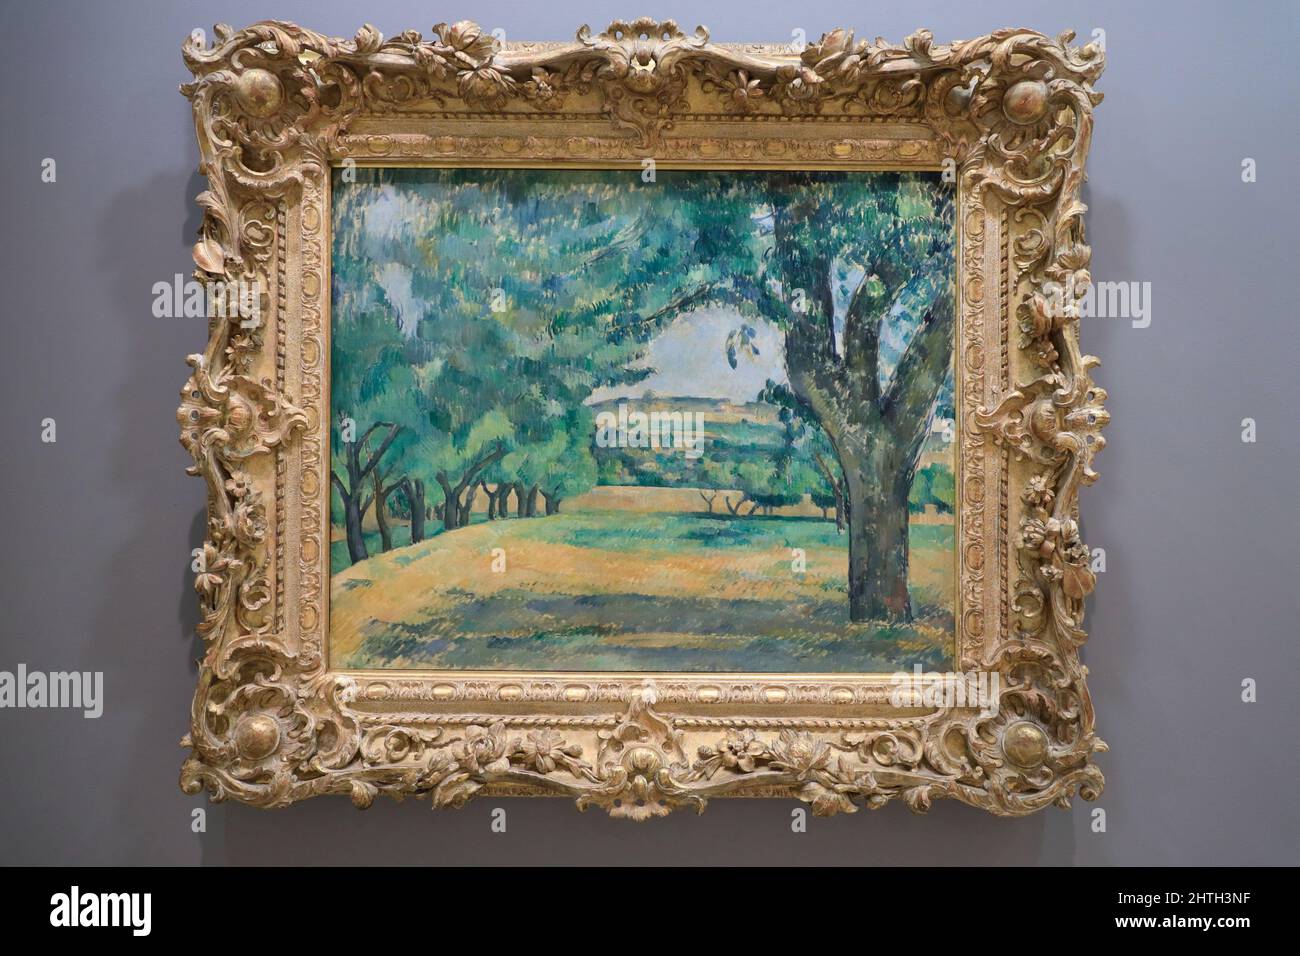 Camille Pissarro's the Hermitage at Pontoise (Les chateaux de l'Hermitage,Pontoise) display in Solomon R.Guggenheim Museum.New York City.New York.USA Stock Photo